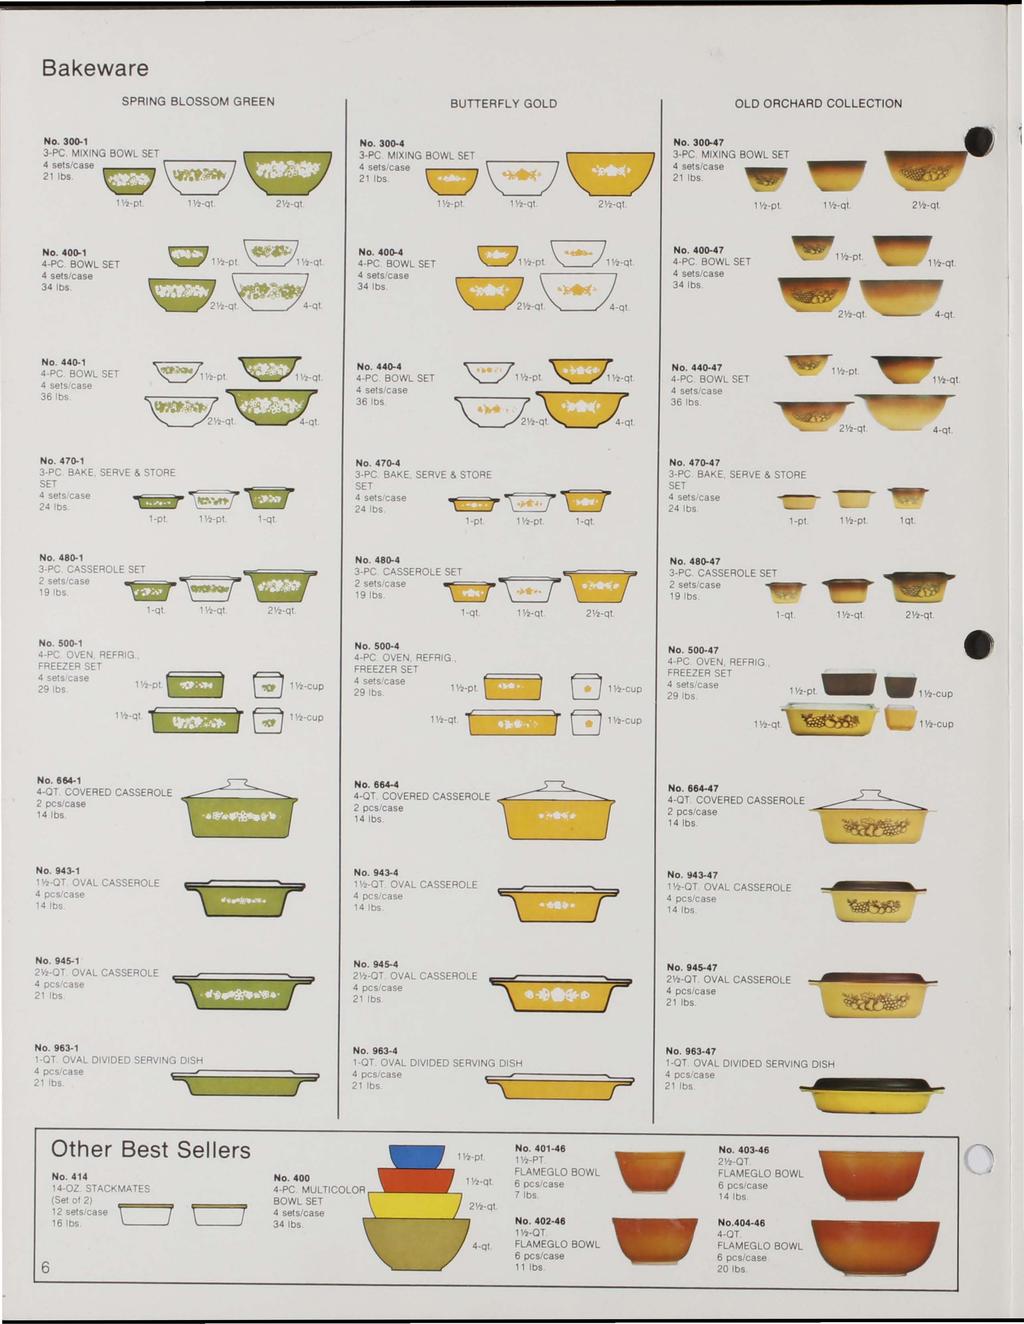 Bakeware SPRING BLOSSOM GREEN BUTTERFLY GOLD OLD ORCHARD COLLECTION No. 300-4 No. 300-47 3-PC MIXING BOWL ~ 3-PC. MIXING BOWL r---j \ ) ~ 11',-pt 11/2-qt 2Yz-qt 1 'h-pt 1 Yz-qt 2Yz-qt No. 400-1 No.